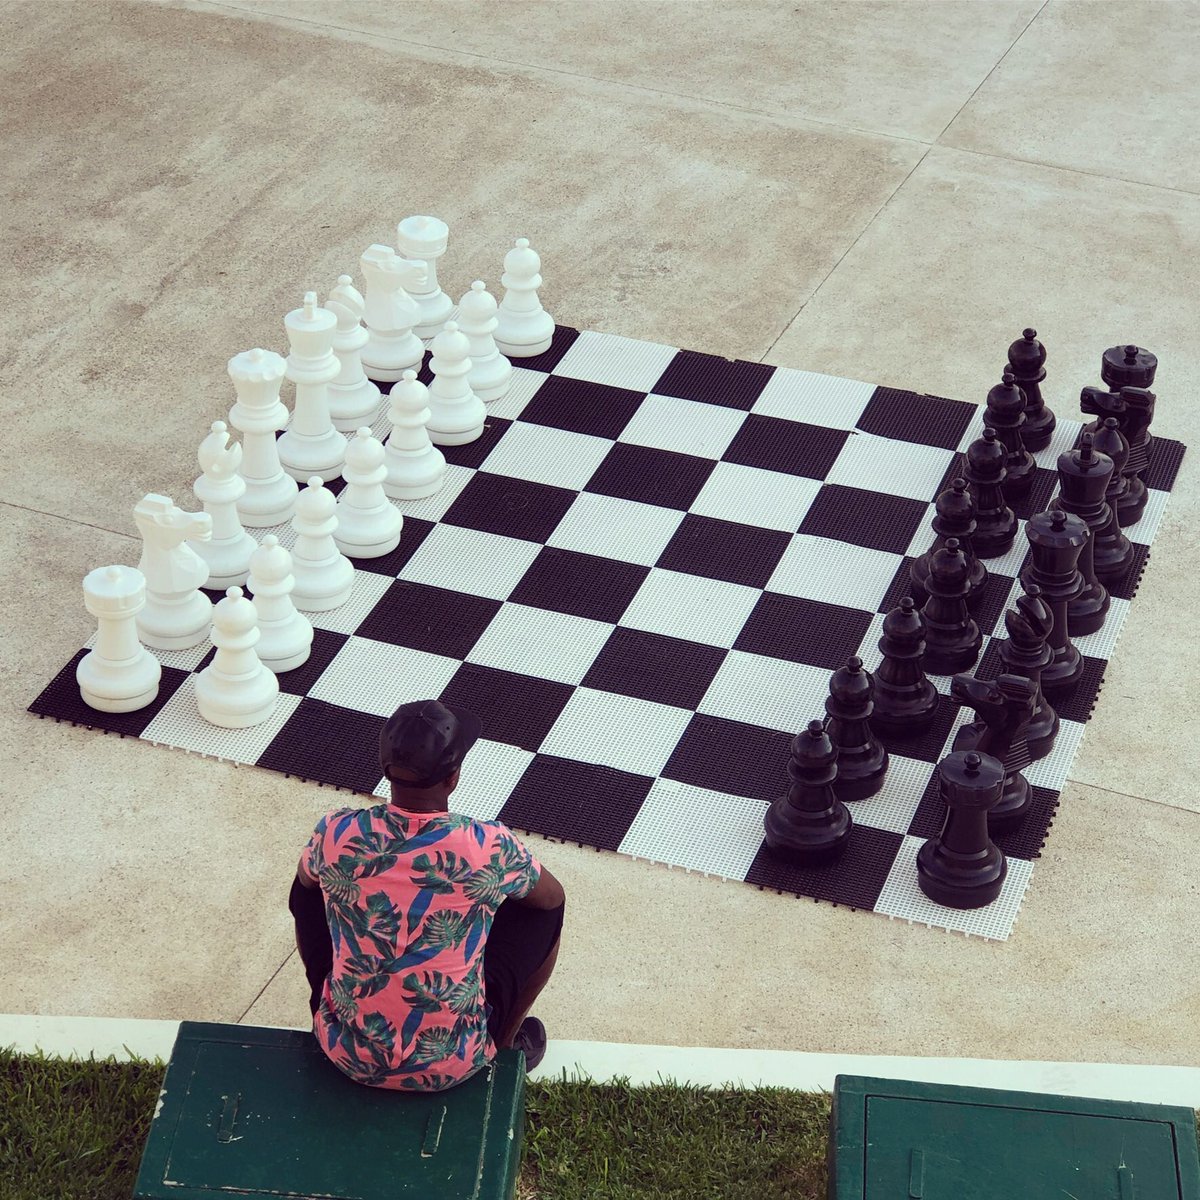 Life is a game of chess & all I do is make power moves 
Photo Credit: @mssunray https://t.co/049IBNZOS4